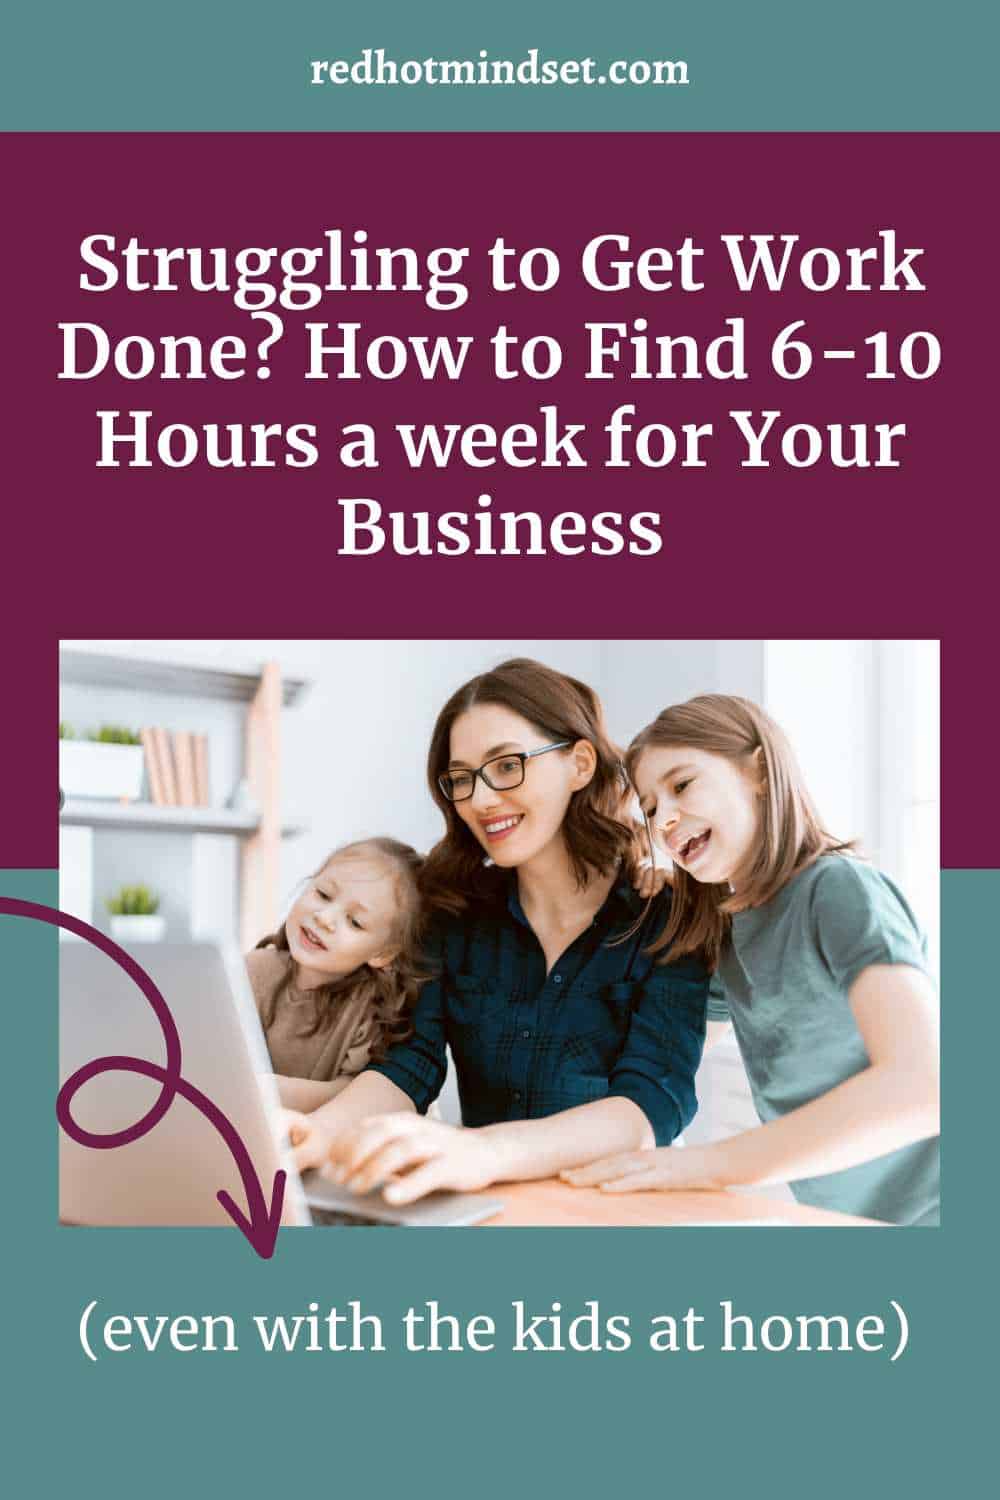 Ep 202 | Struggling to Get Work Done? How to Find 6-10 Hours a Week for Your Business (even with your kids at home)